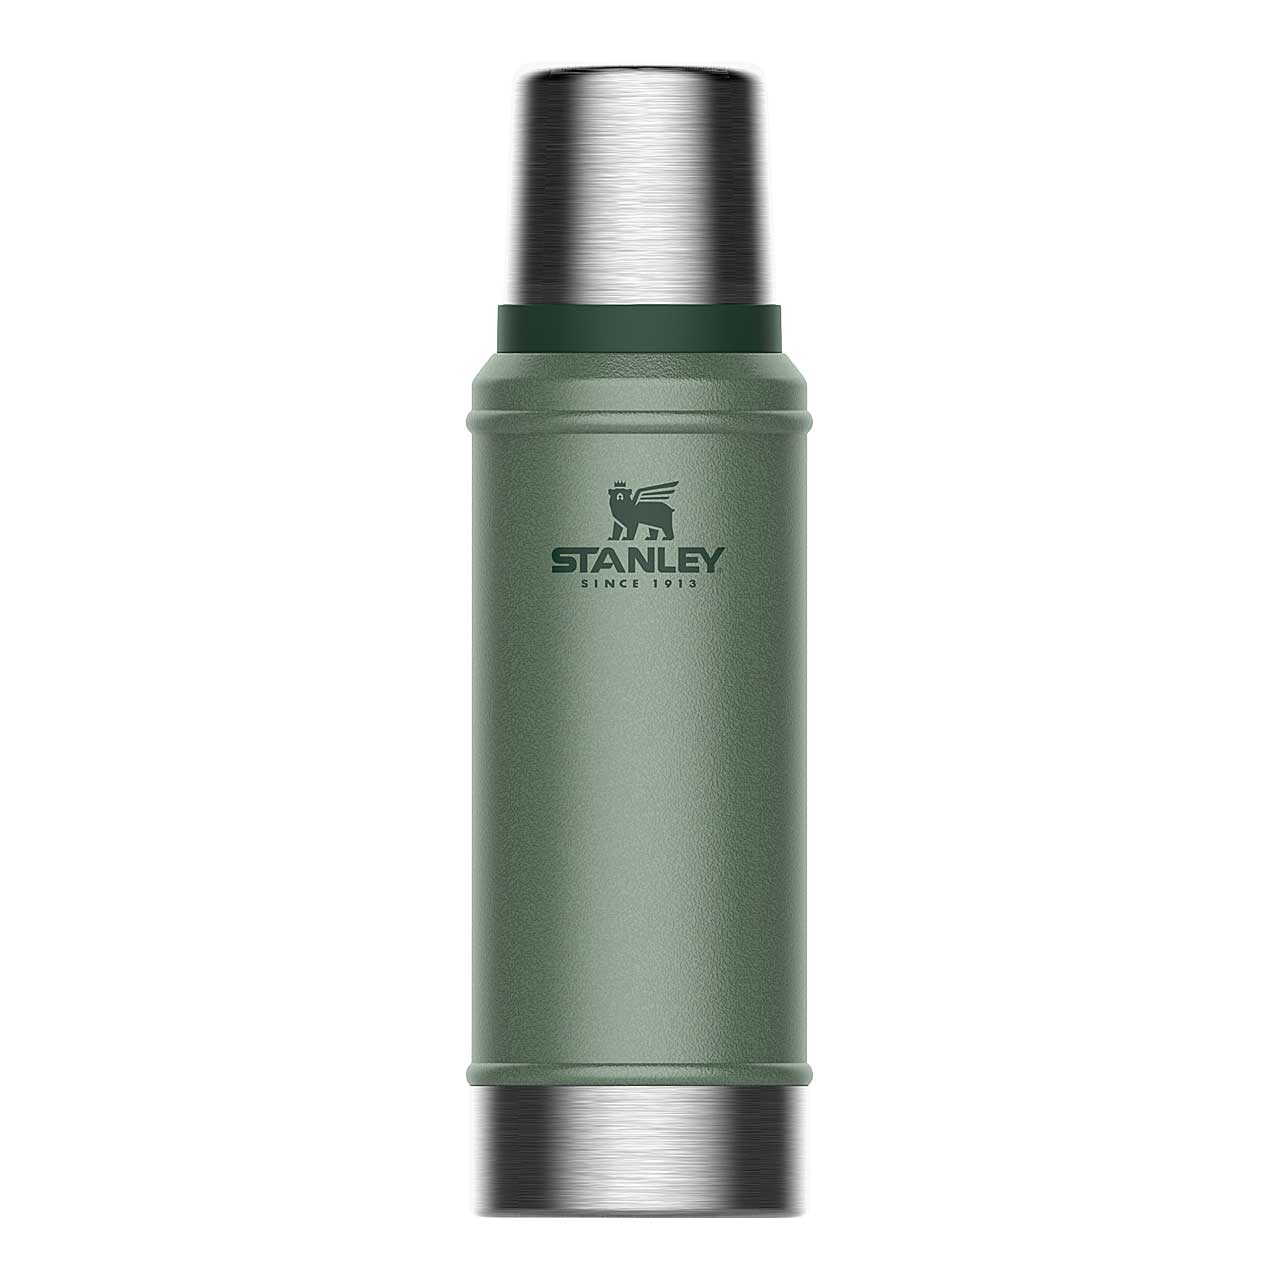 Picture of Stanley Classic Legendary Insulated Bottle - 0.47 liter - Hammertone Green